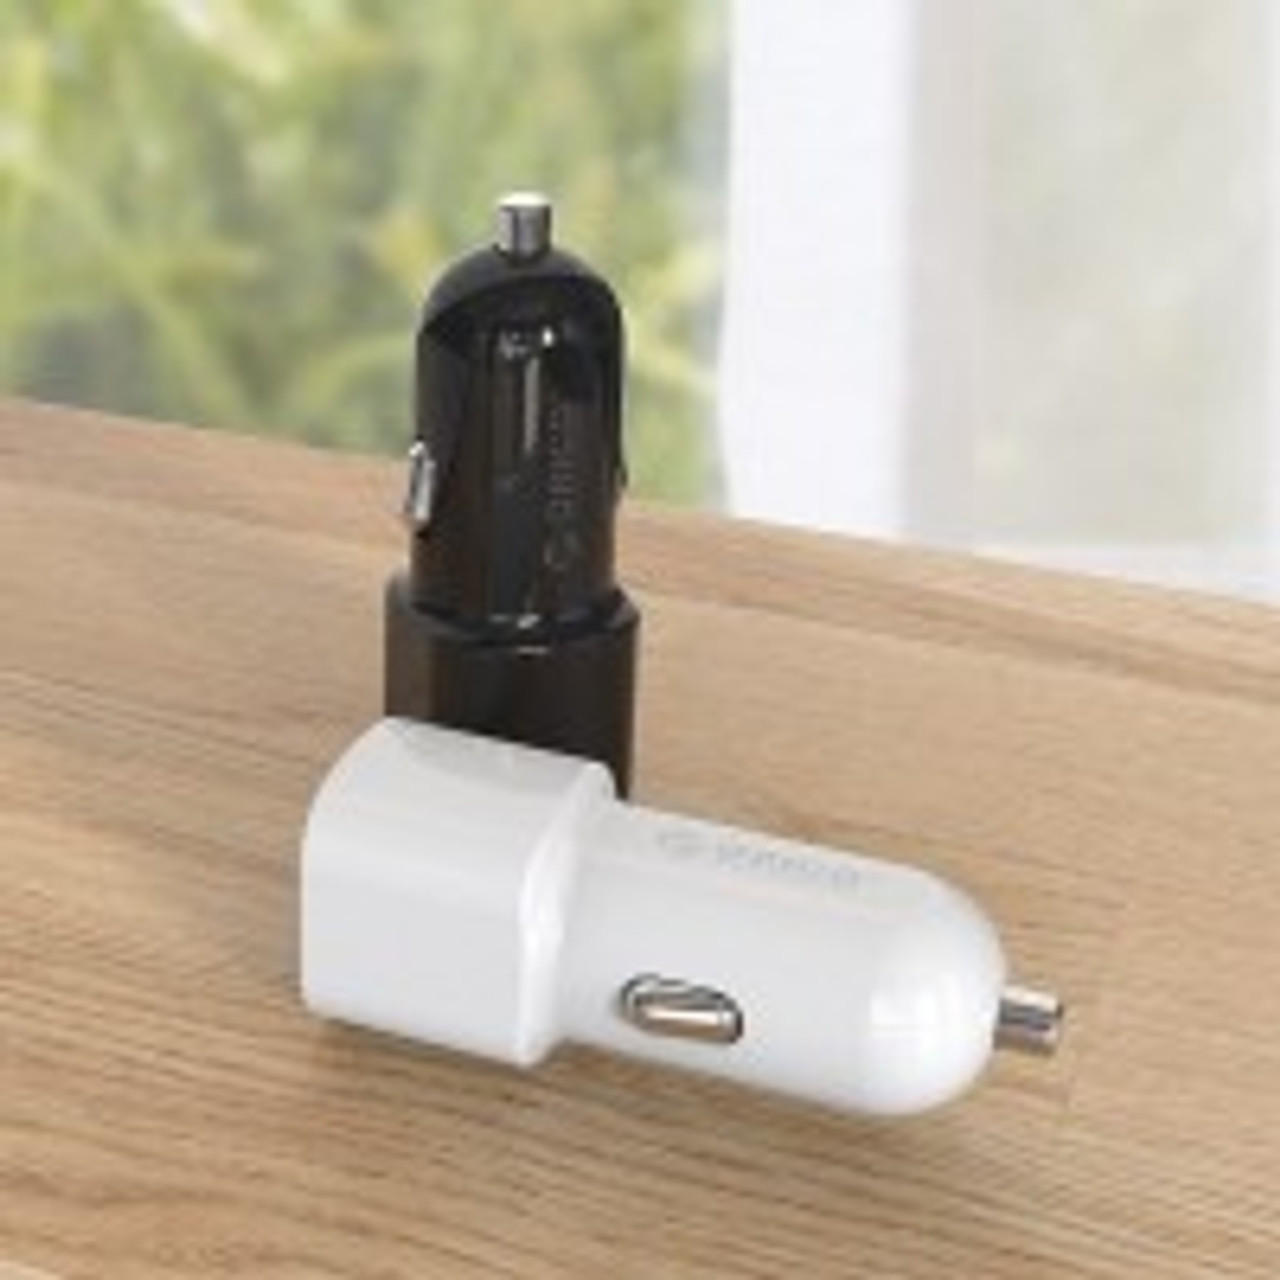 Orico 2 port USB car charger 12V / 24V 3.4A max 17W with Intelligent IC -  White